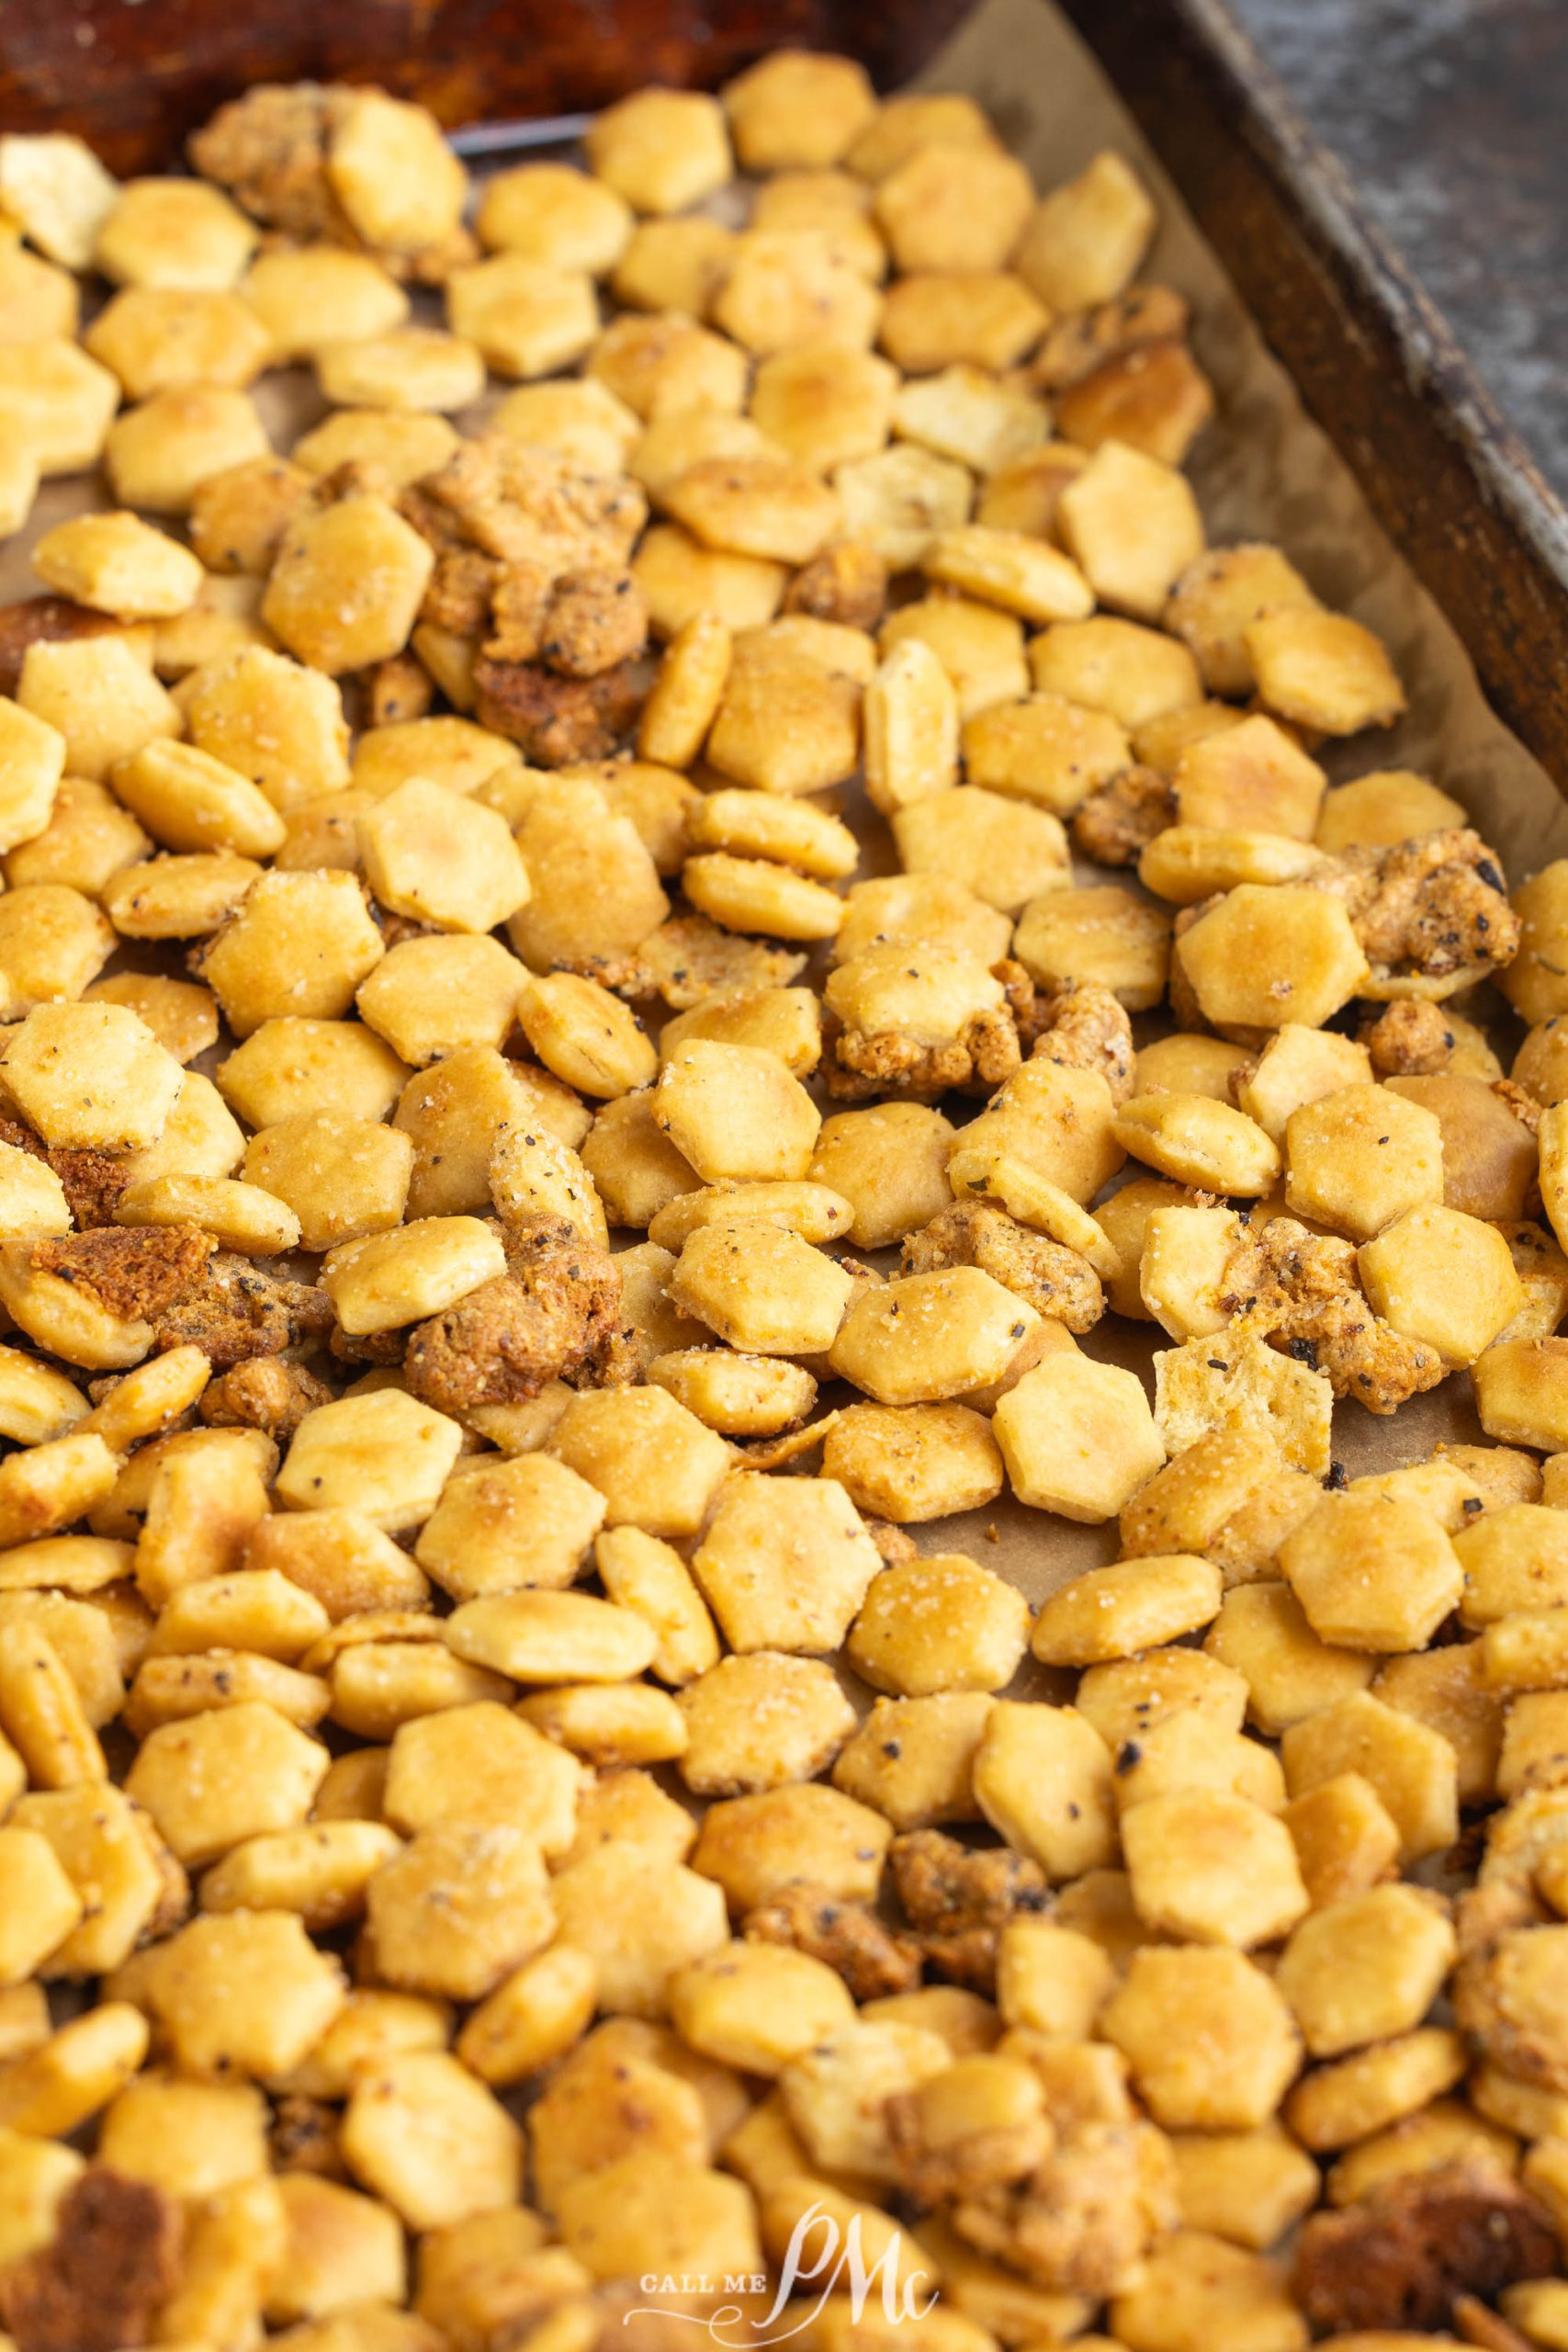 A close-up of baked oyster crackers covered in seasoning on a baking sheet.